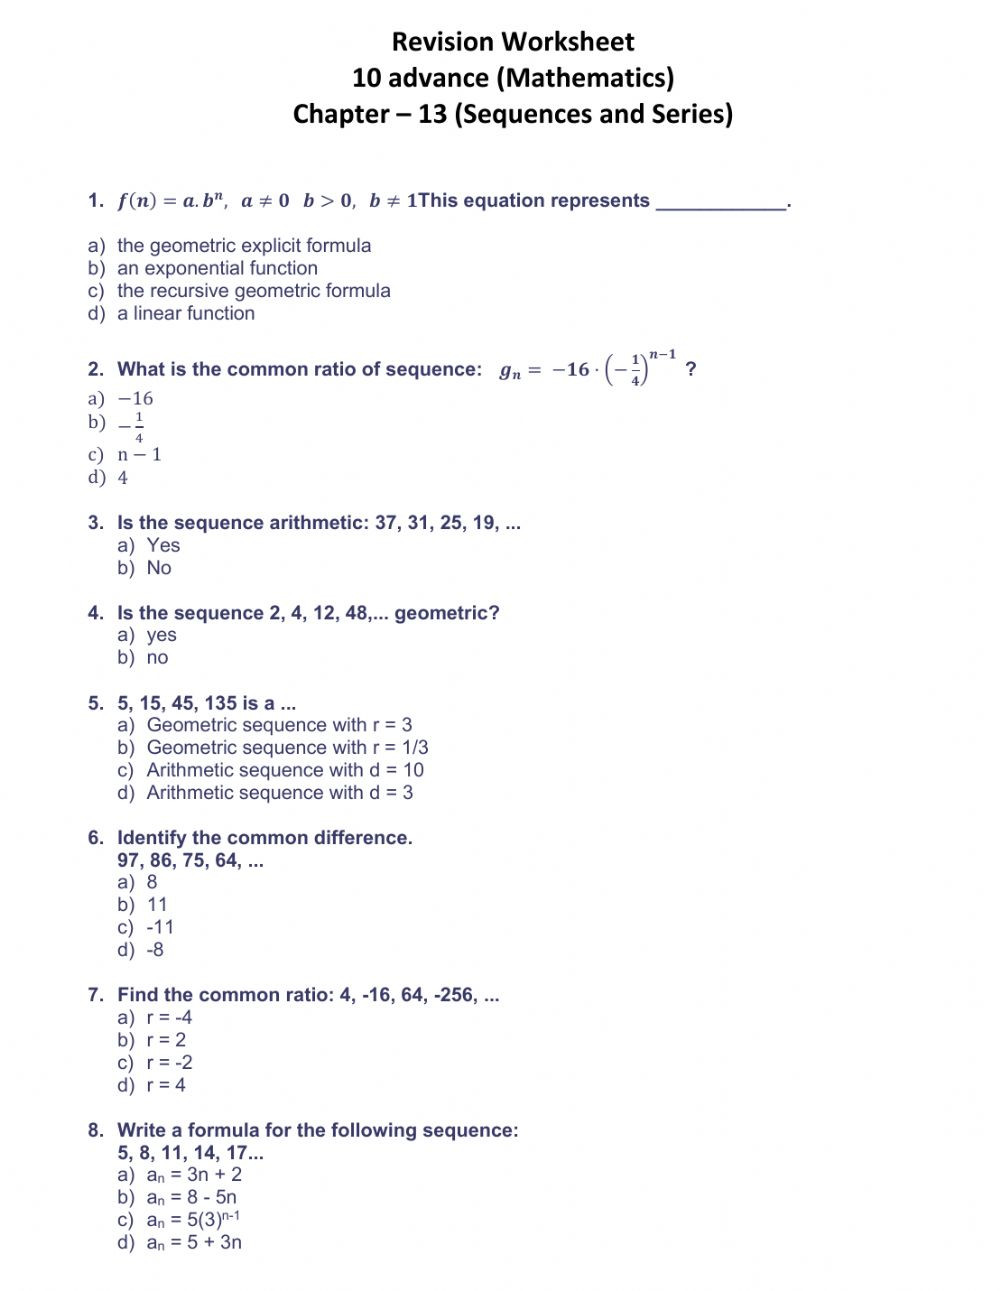 Geometric and Arithmetic Sequence Worksheet Sequences and Series Ch 13 10a Interactive Worksheet